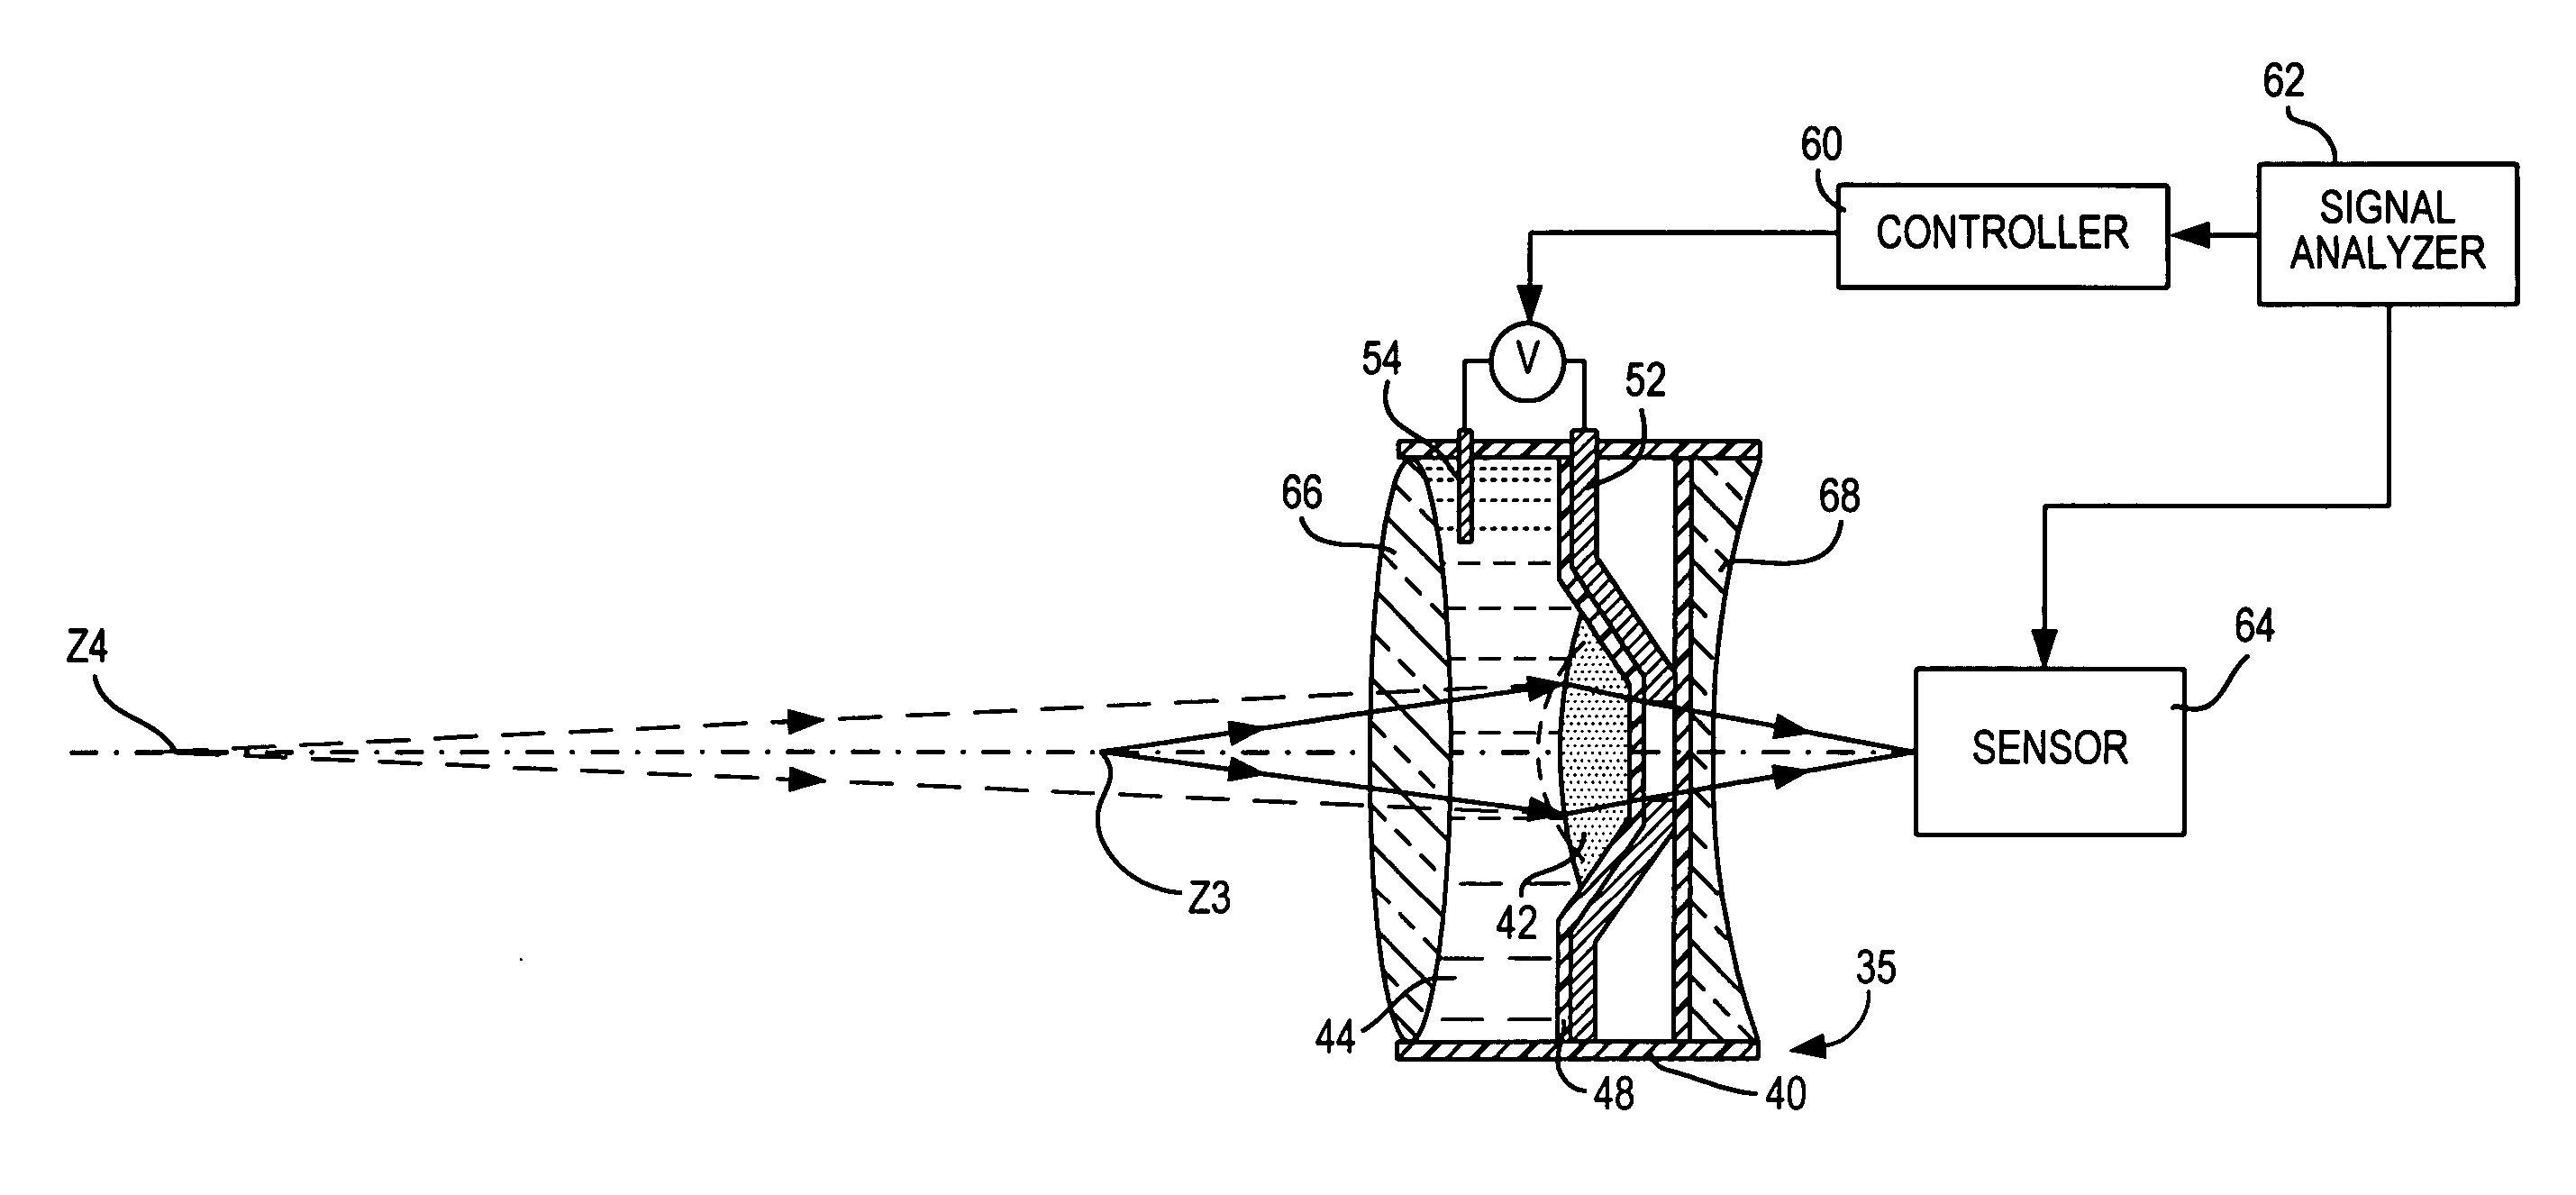 Optical adjustment for increased working range and performance in electro-optical readers